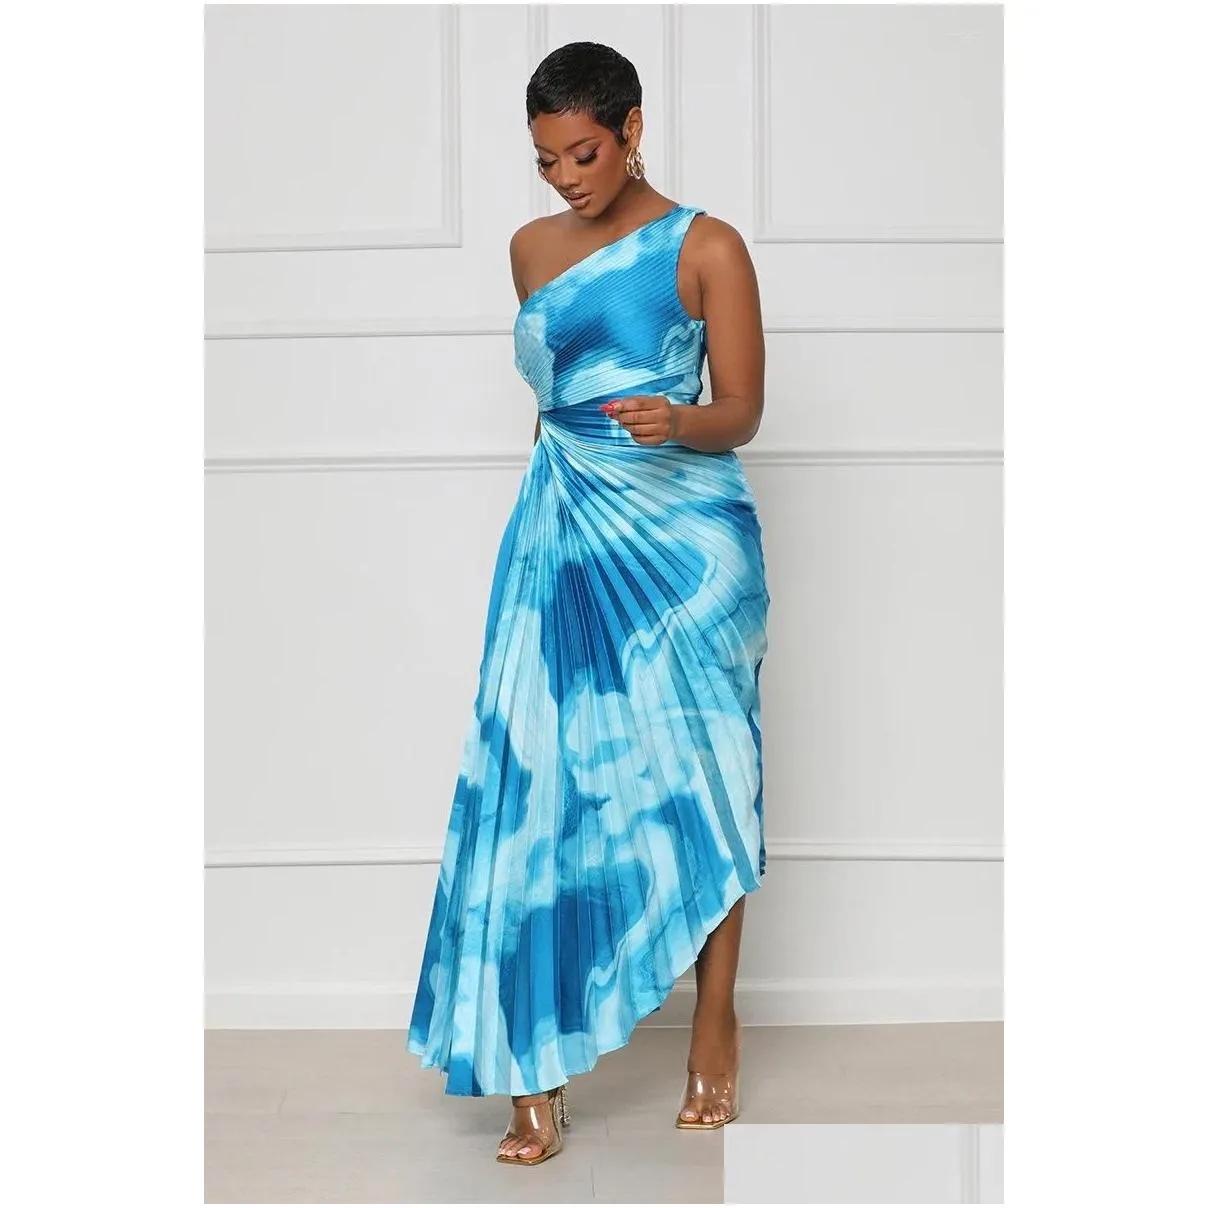 Basic & Casual Dresses Chocomist Beach Style Tie-Dye Folds One-Shouder Women Maxi Drop Delivery Apparel Women`S Clothing Dhznj